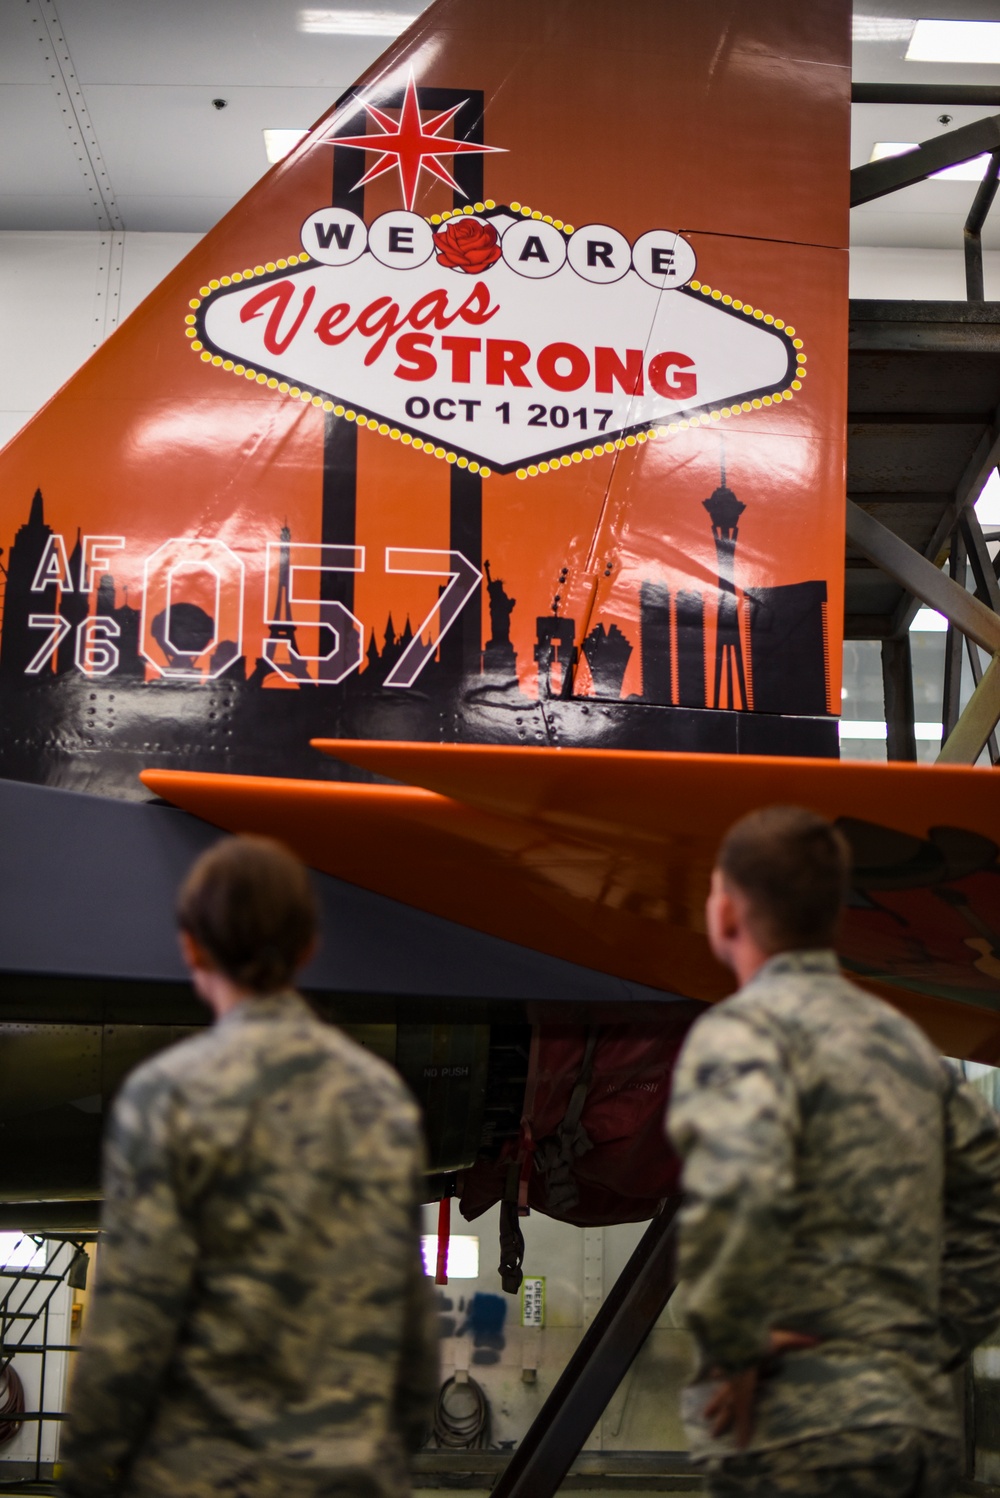 Nellis shows it is Vegas Strong